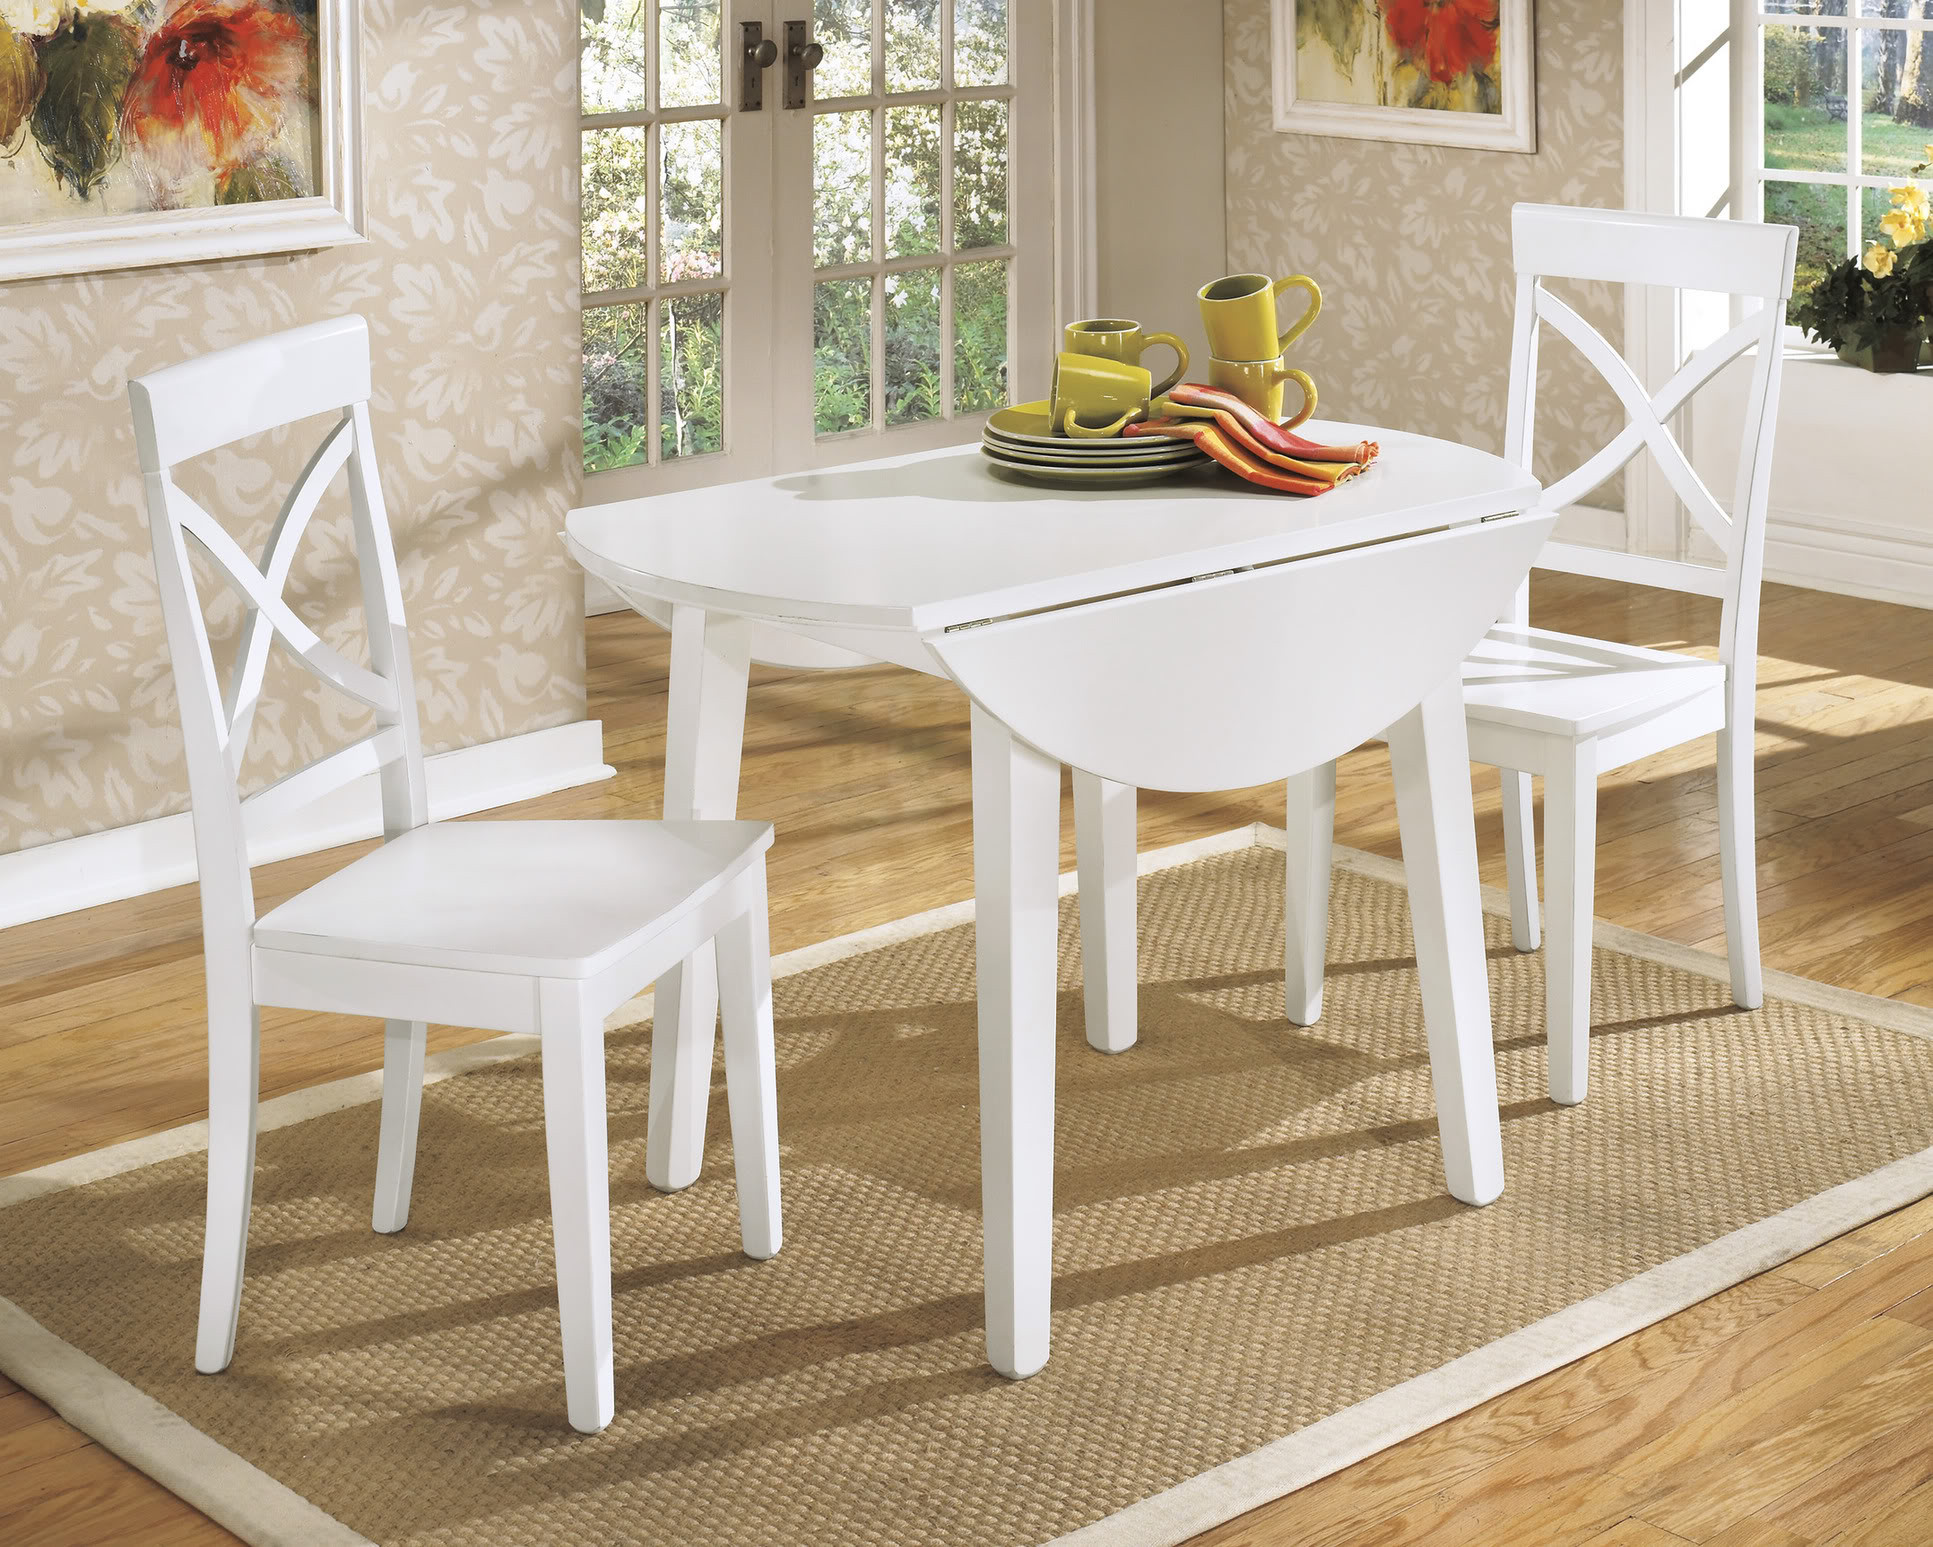 Small Round Kitchen Tables
 White Round Kitchen Table and Chairs Design – HomesFeed